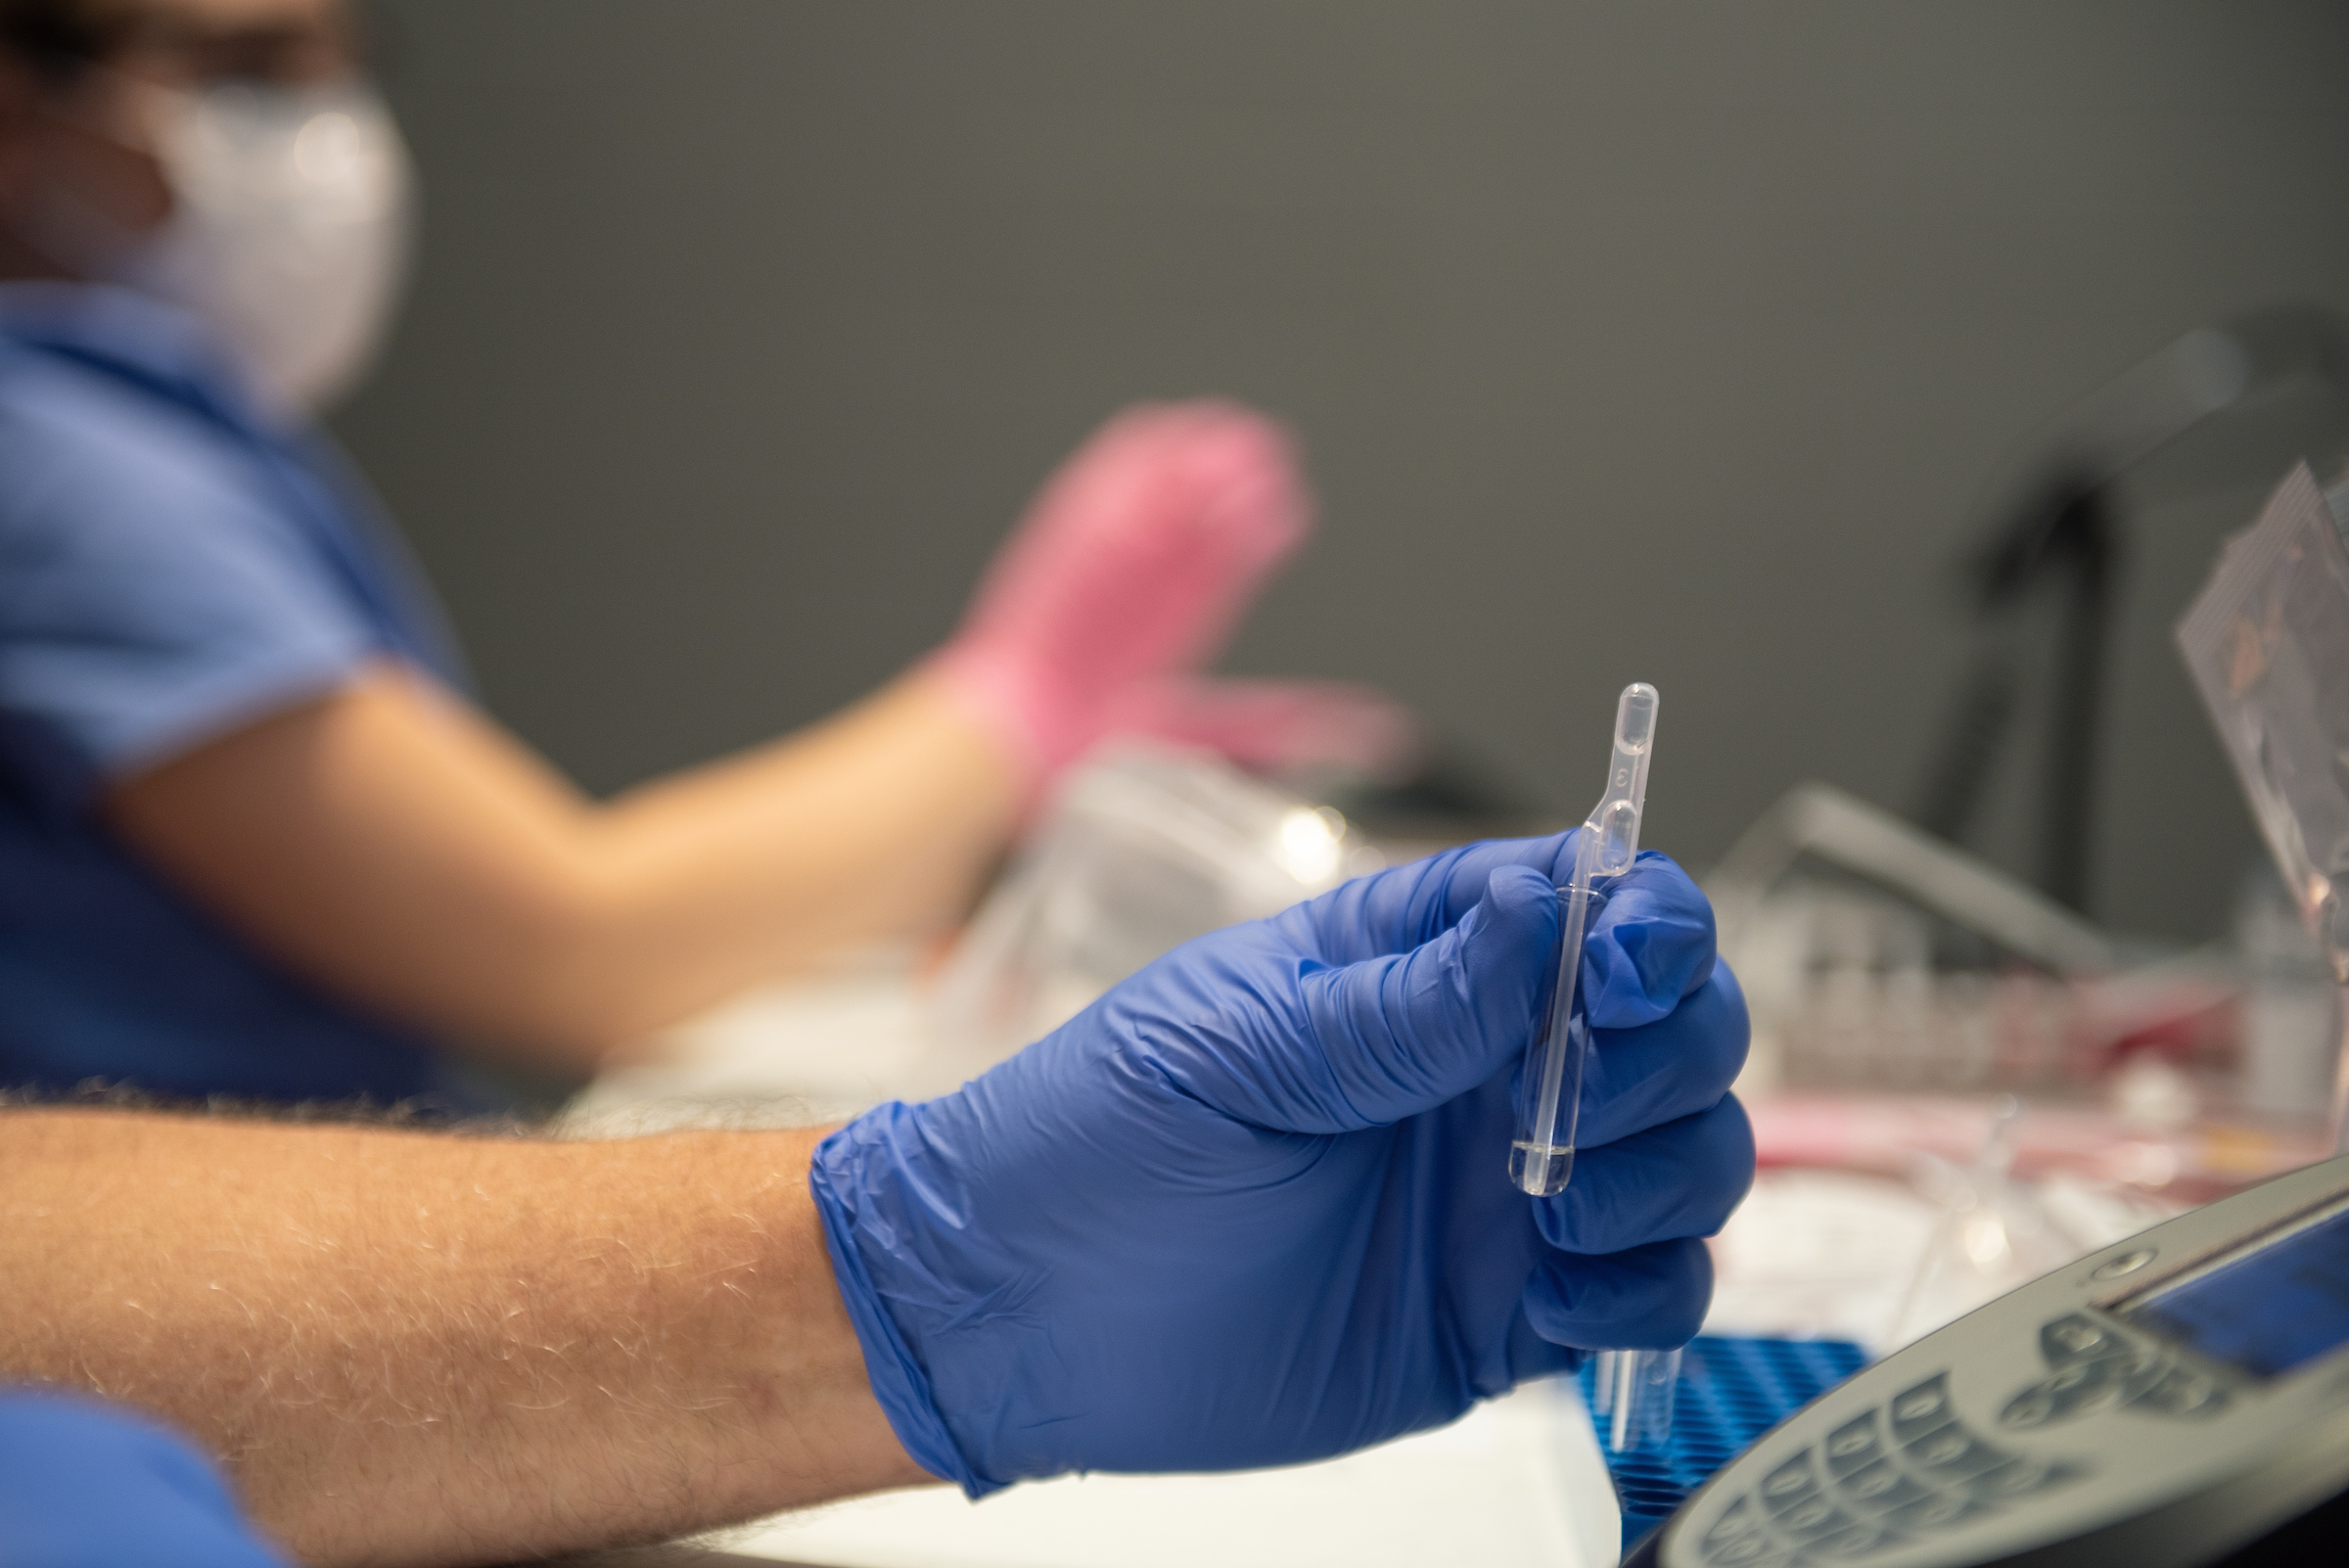 A testing sample is handled by a gloved hand